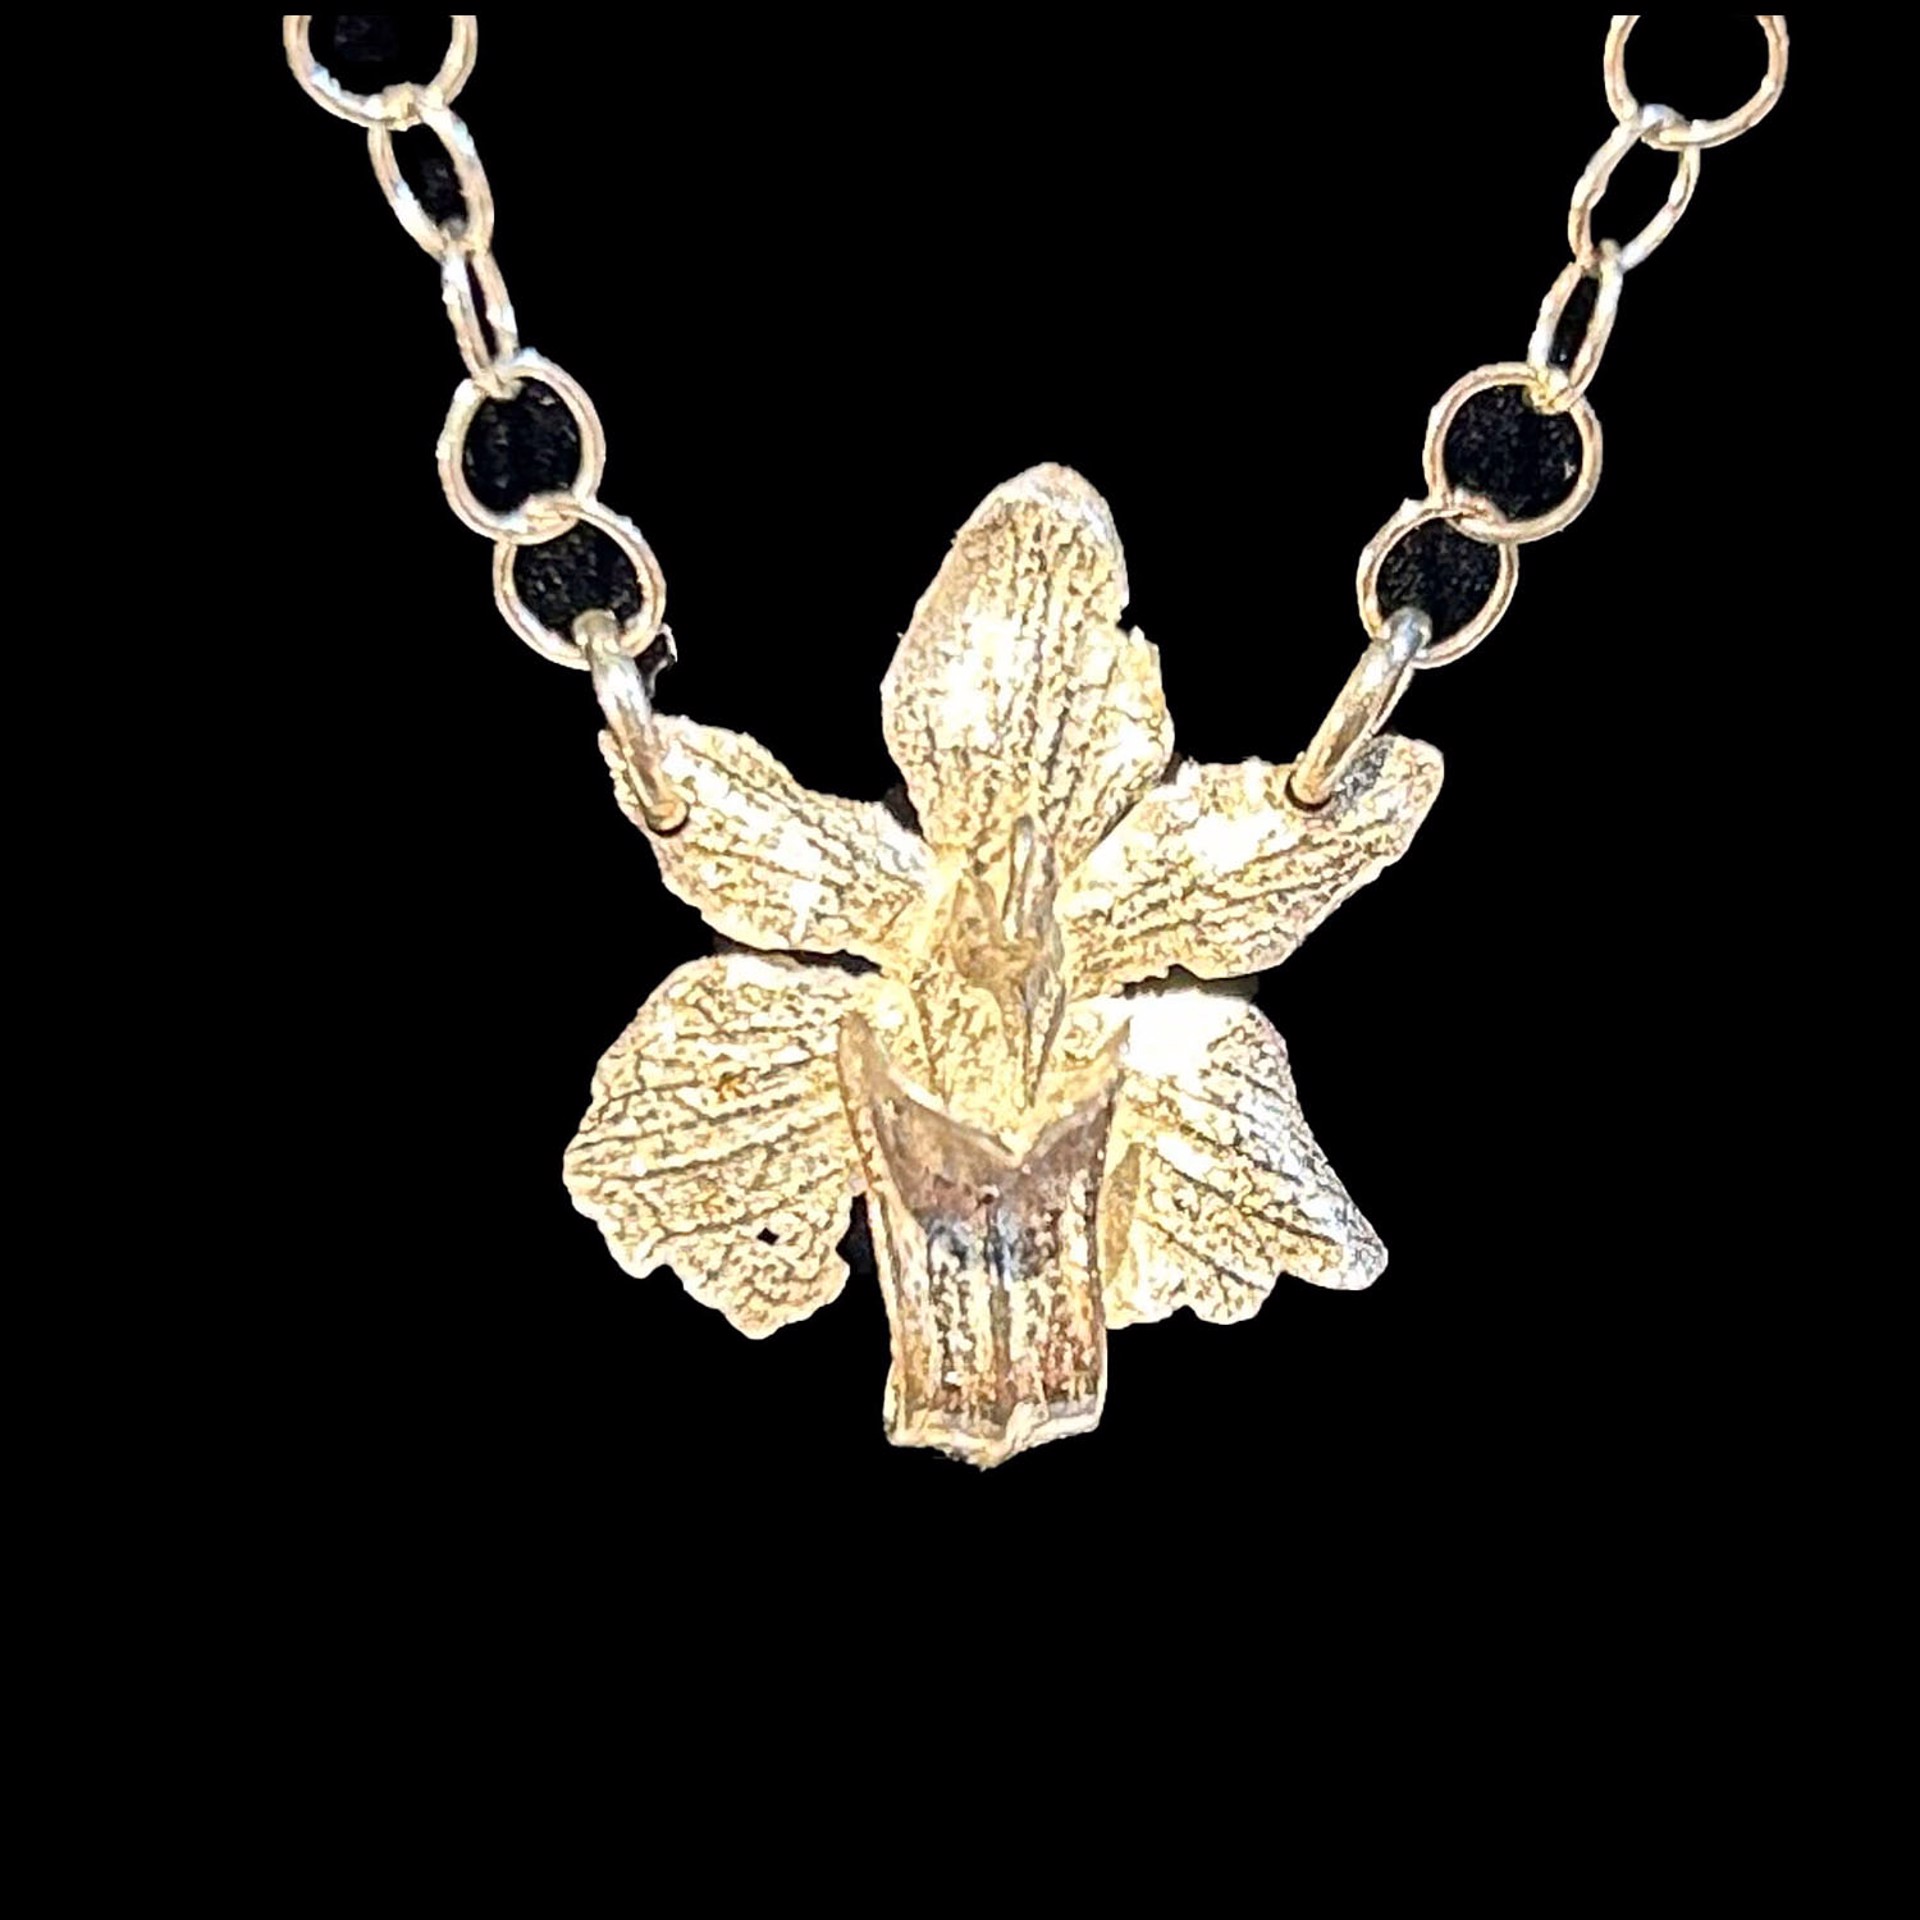 Small Single Orchid Necklace by Wayne Keeth